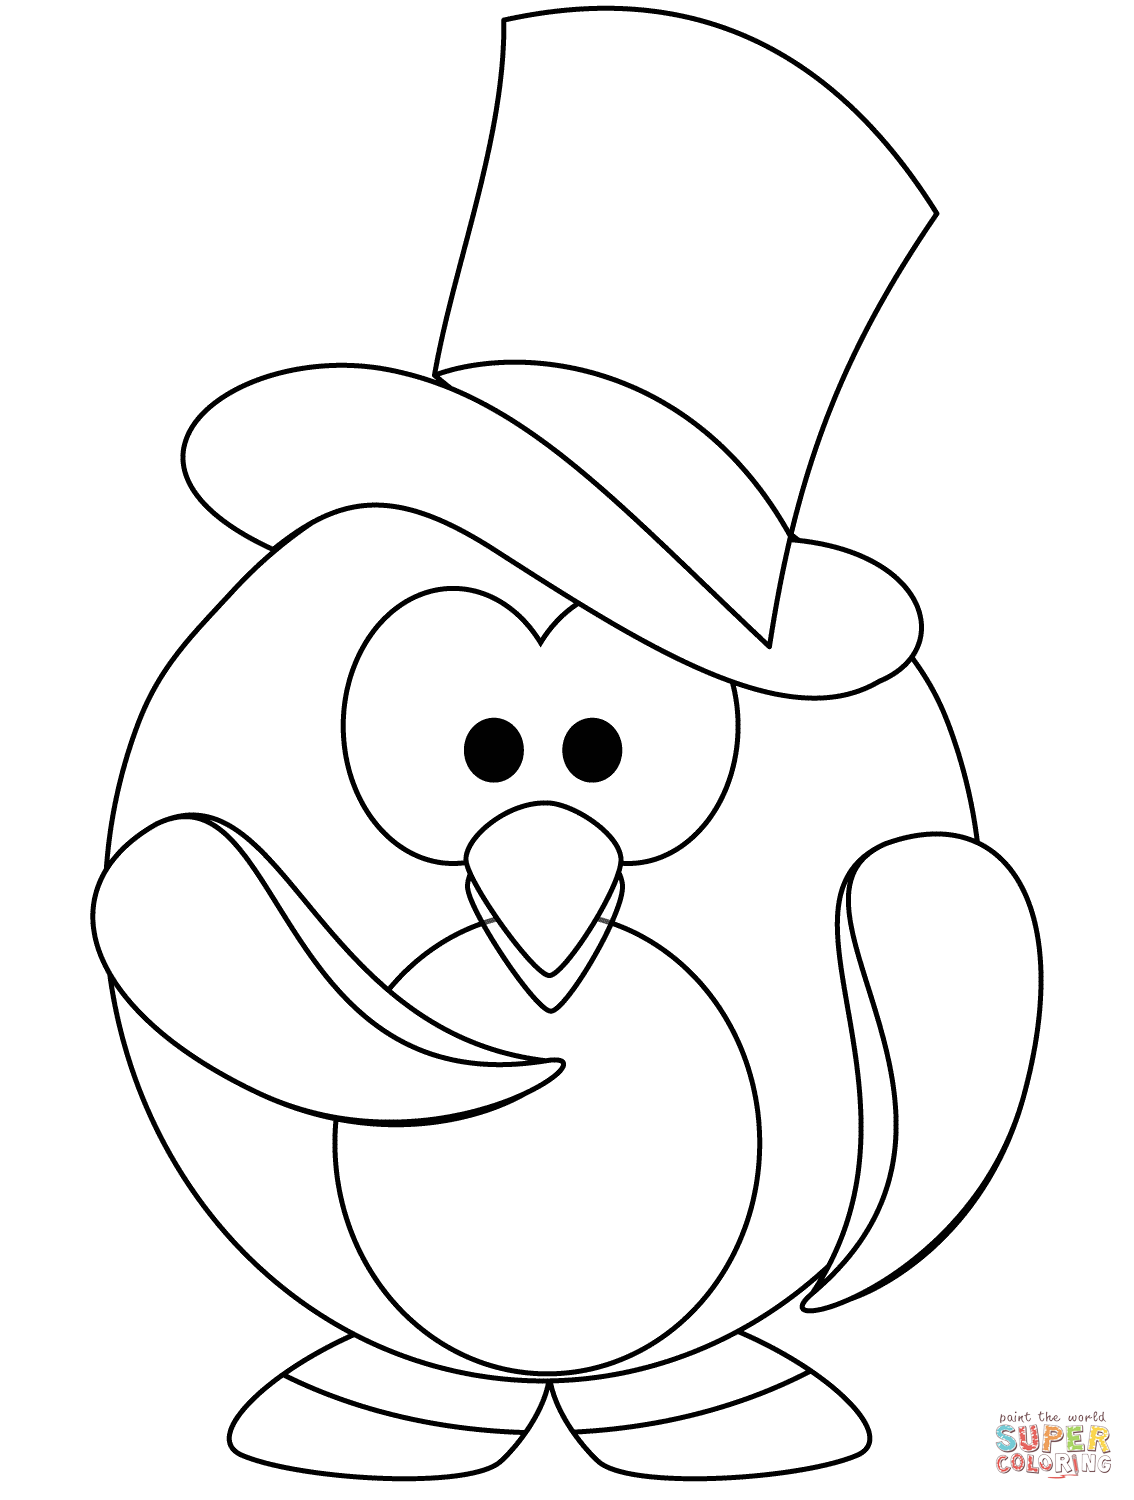 The Gentleman Penguin coloring page | Free Printable Coloring Pages